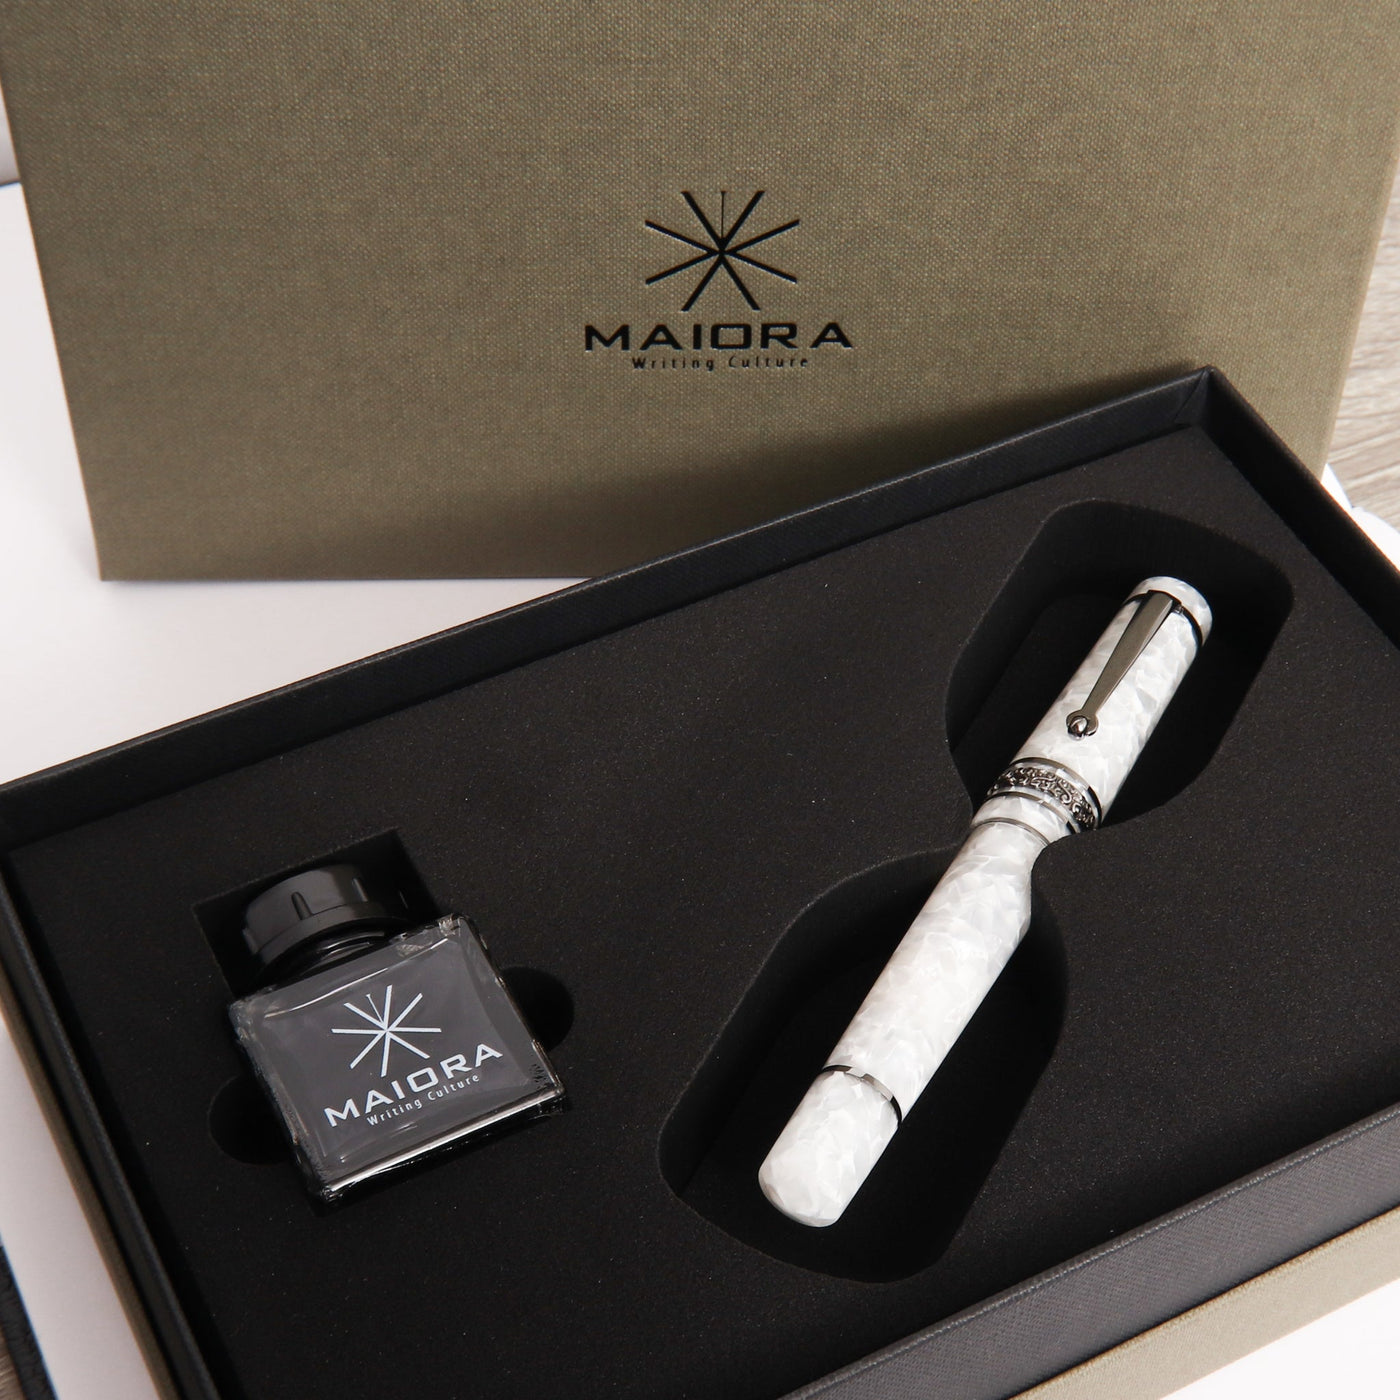 Maiora Perla Nera Limited Edition 98 Fountain Pen Inside Packaging